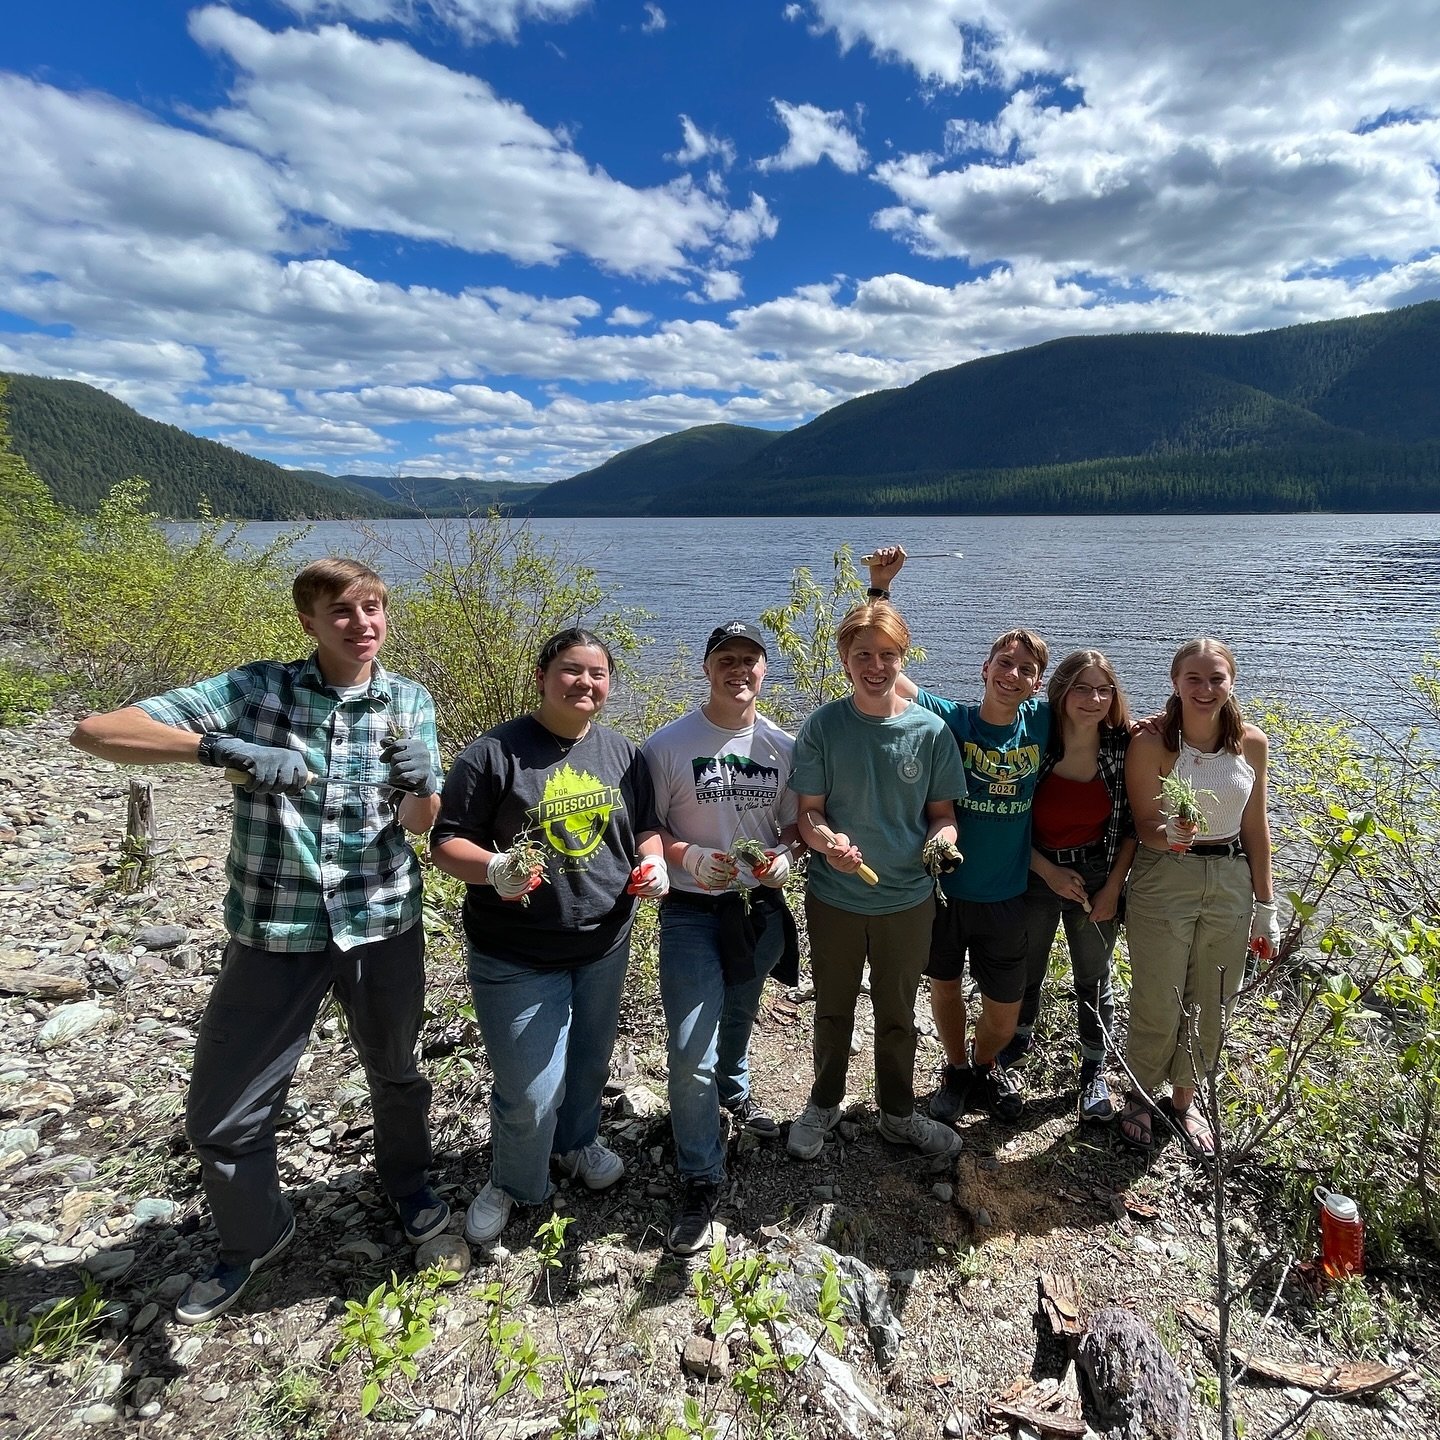 It&rsquo;s Montana&rsquo;s Noxious Weed Awareness Week! On May 31st, Glacier High School&rsquo;s Environment Club joined us for a Pull Your Share event at Tally Lake in collaboration with the Flathead National Forest. 

In addition to learning to ide